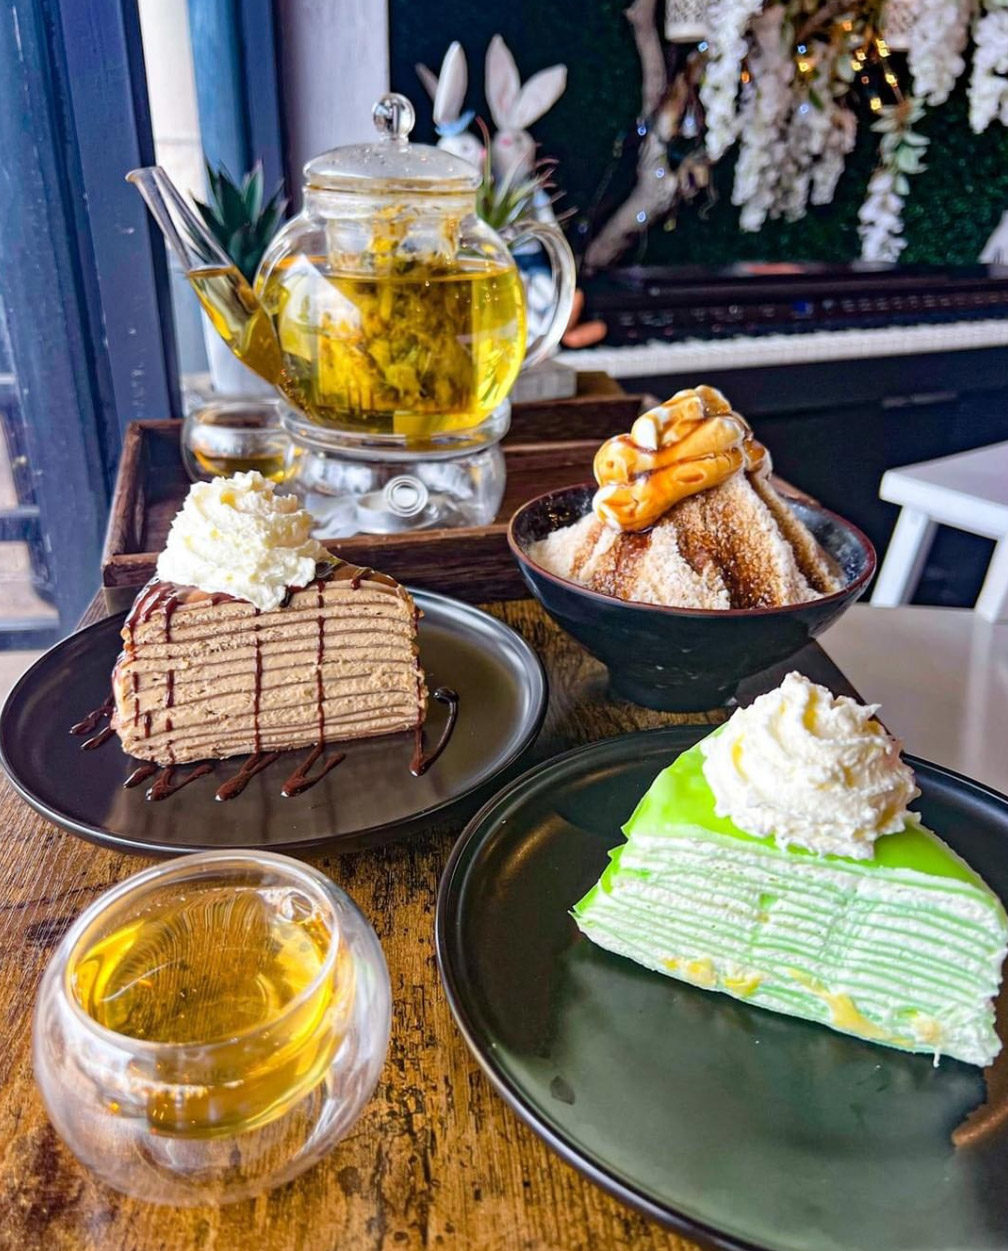 Two crepe layer cake slices on two plates with a pot of yellow tea and a glass of yellow tea. 